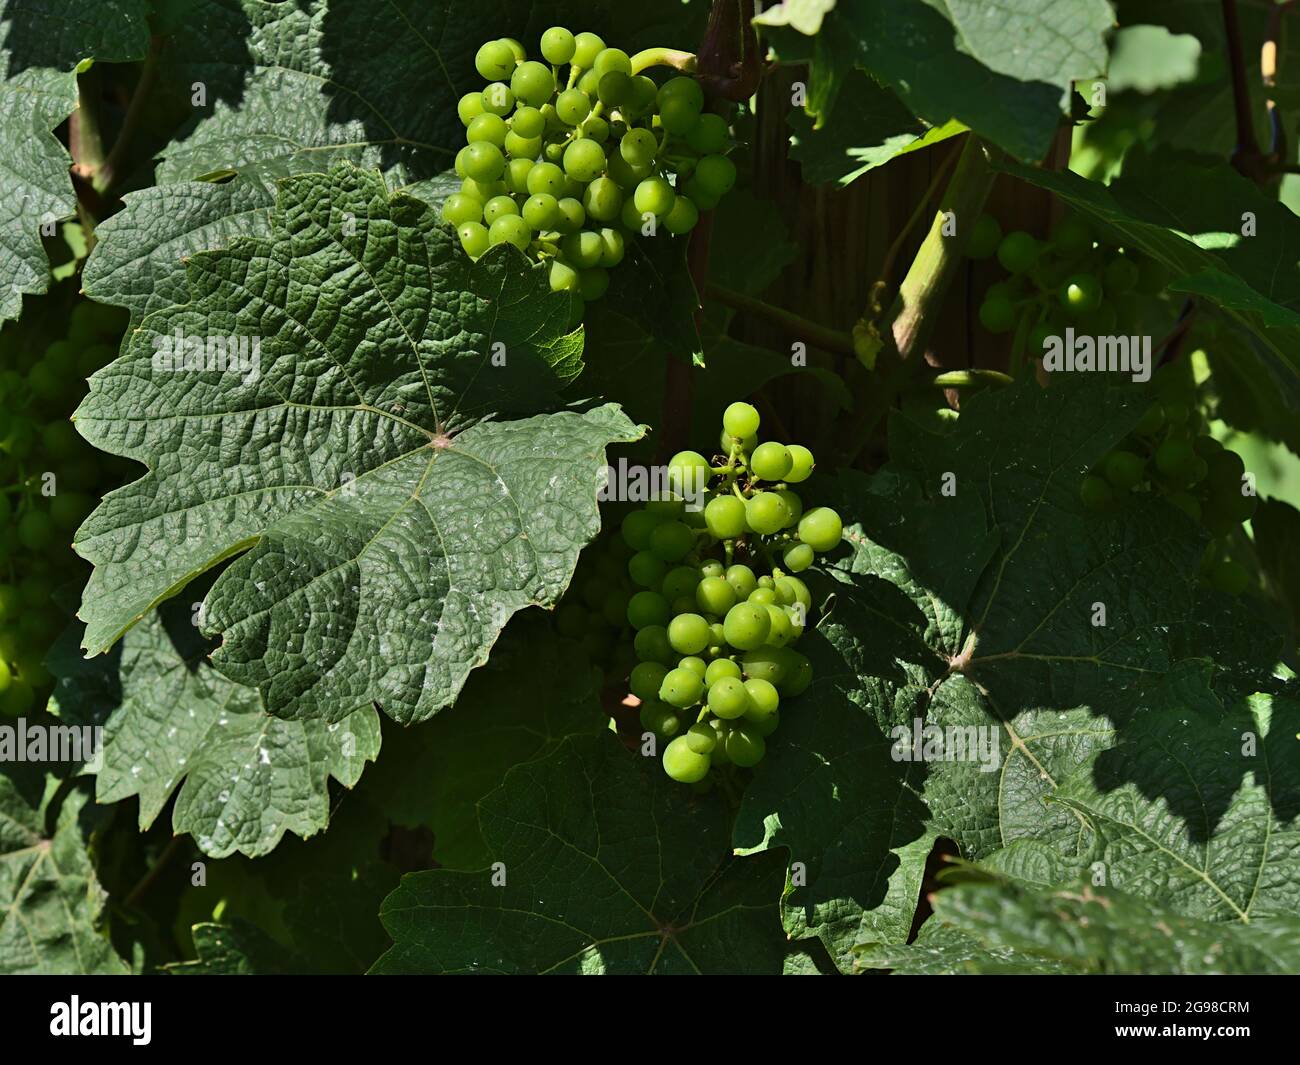 Closeup view of vine plant (vitis vinifera) with young, unripe grapes between big green leaves in summer season on vineyard near Boppard, Rhine valley. Stock Photo